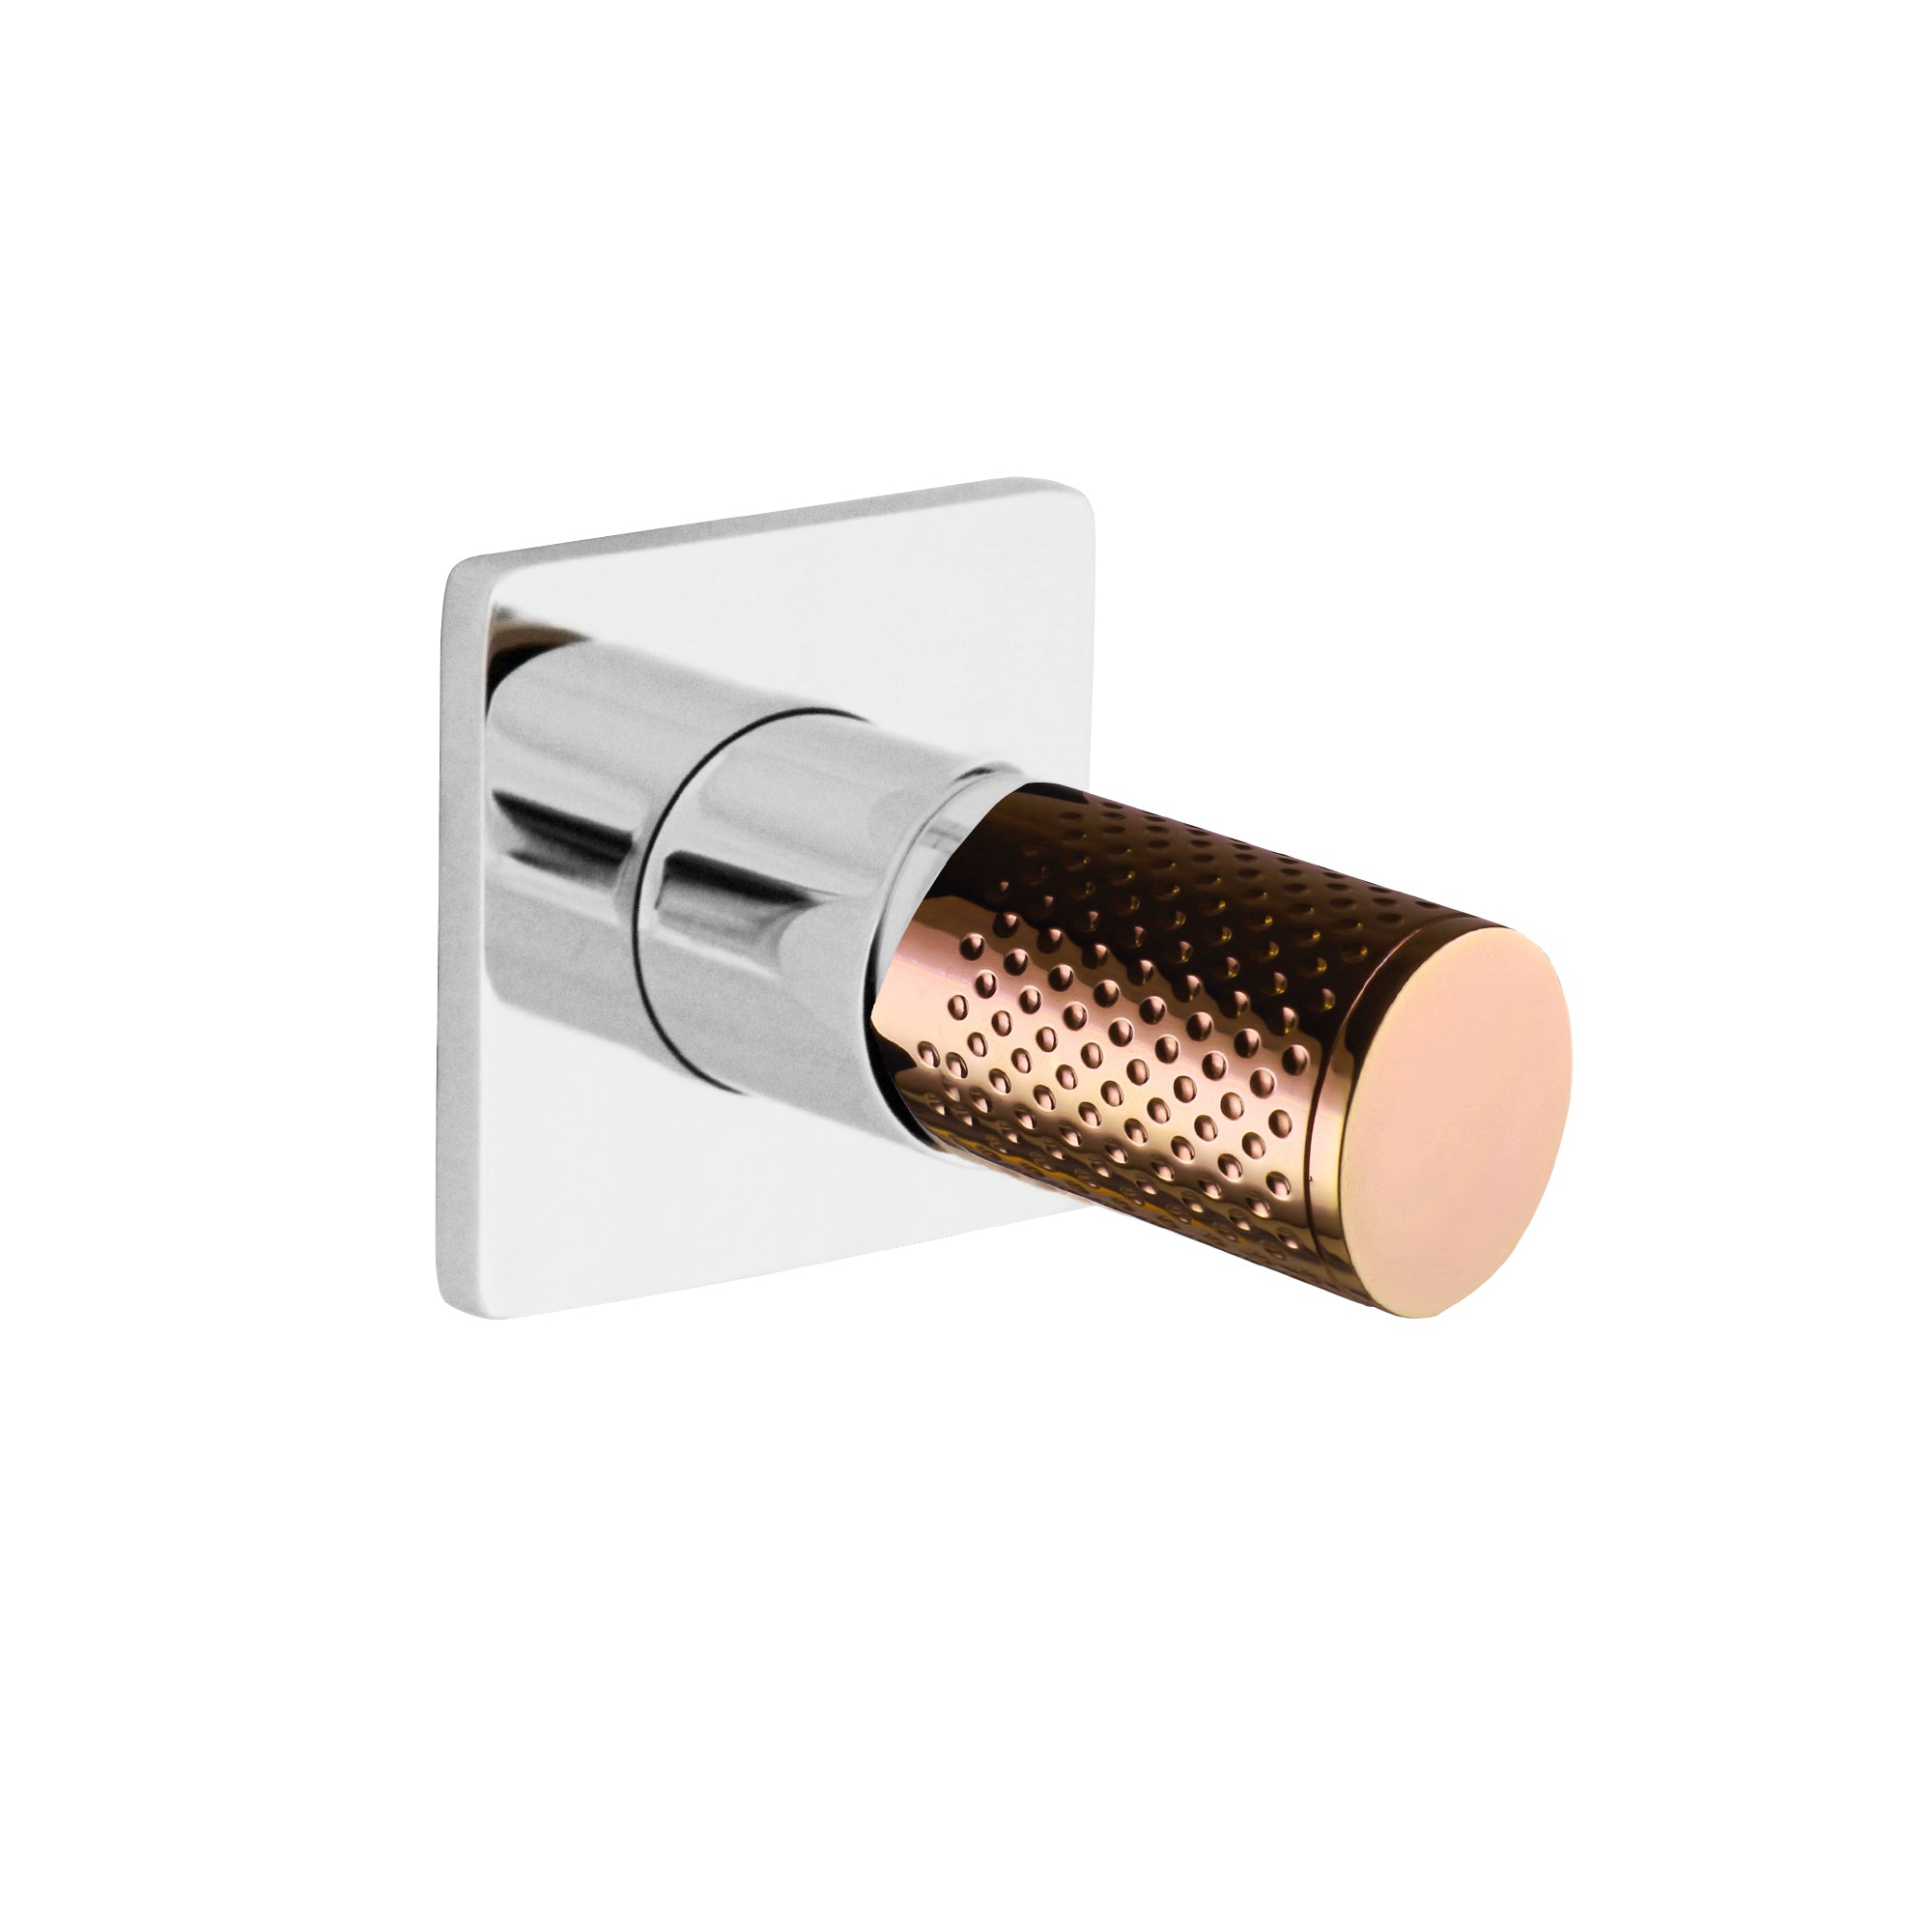 LINKWARE GABE WALL MIXER CHROME AND ROSE GOLD